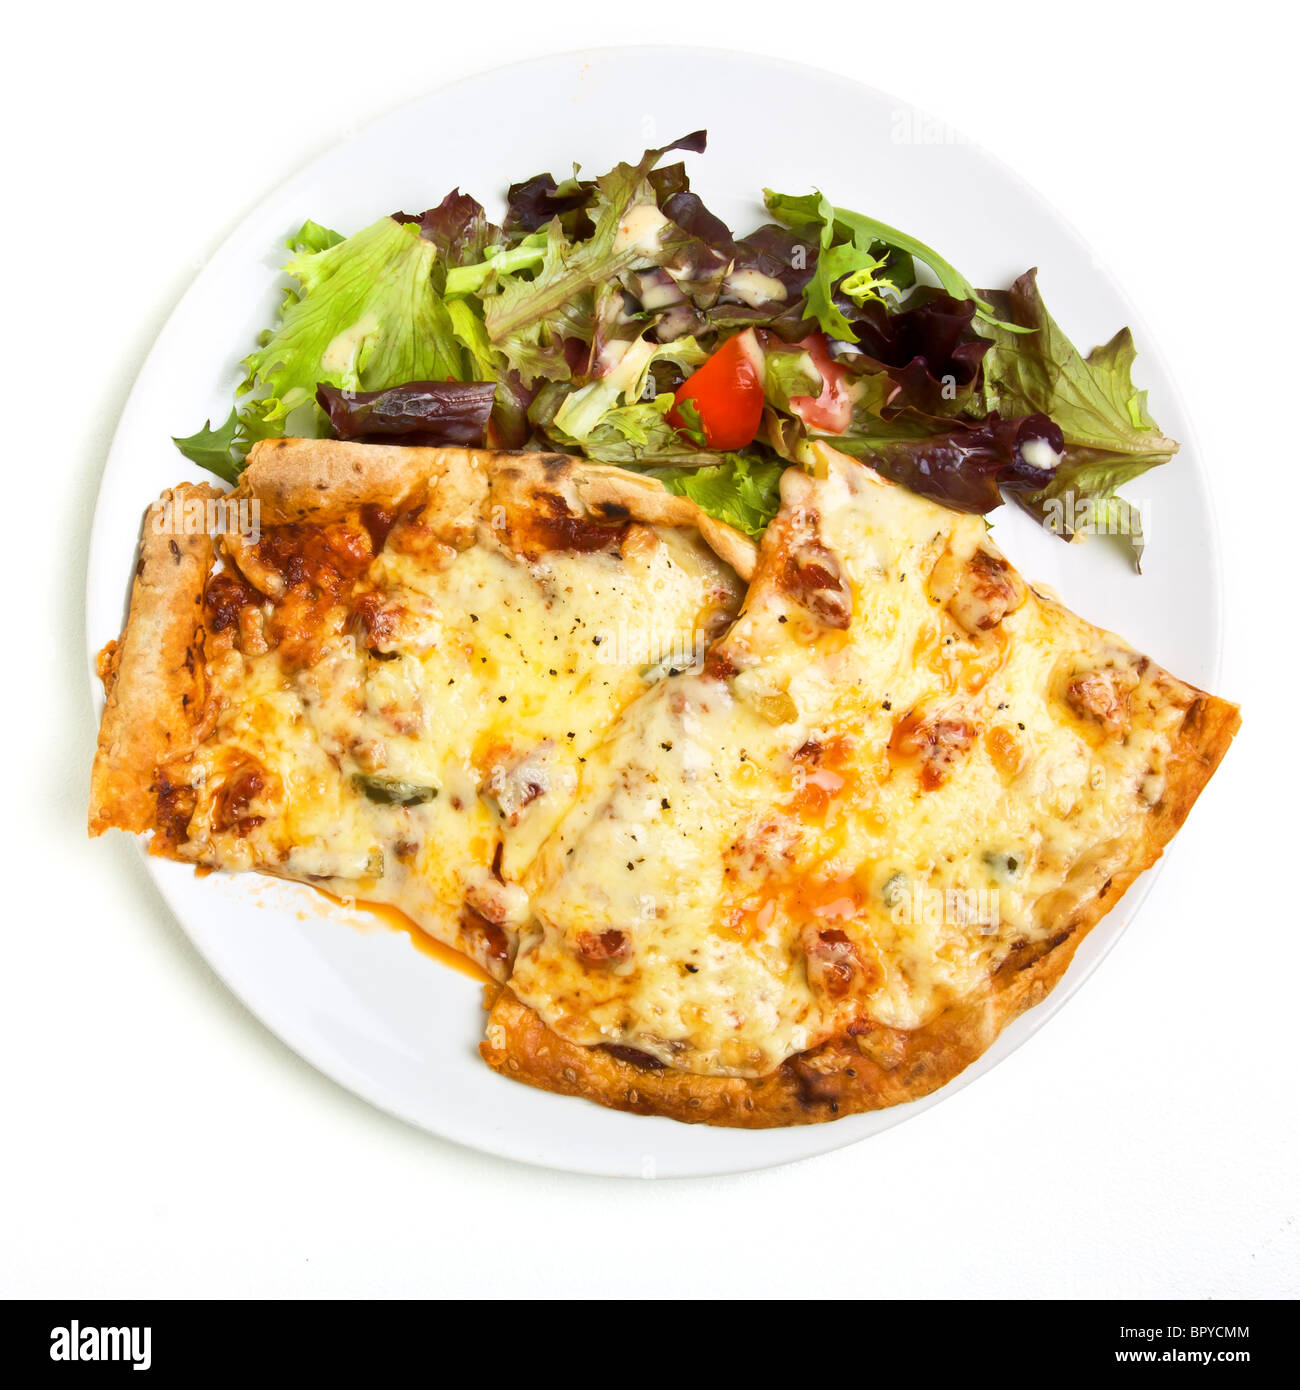 Vibrant tasty looking home made pizza and salad with dressing. Stock Photo